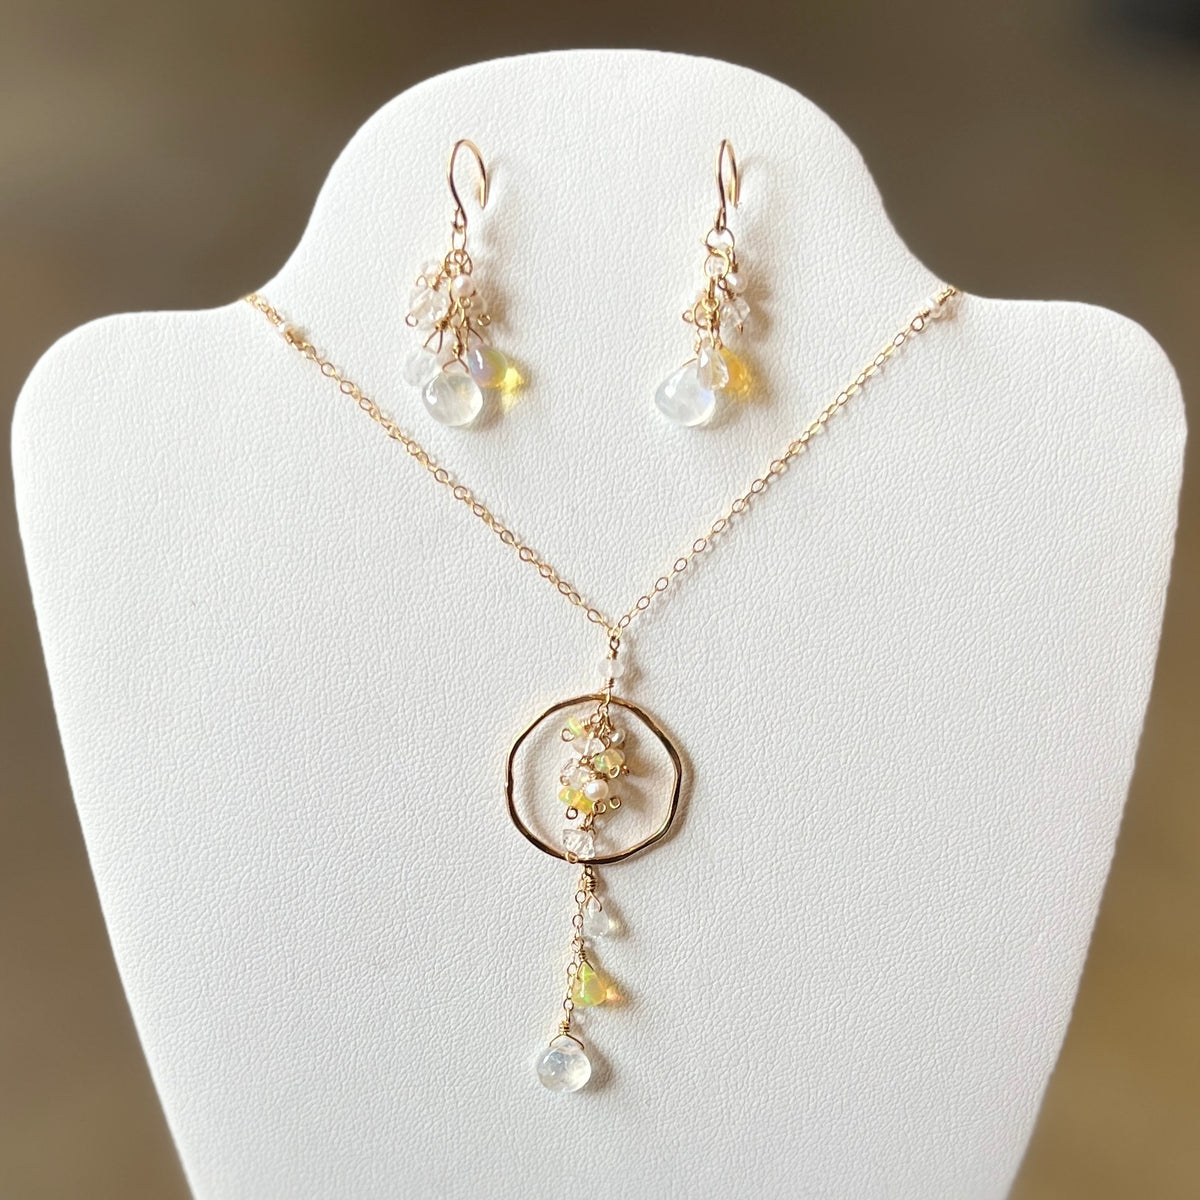 Vannucci Citrine Drop Earring and Necklace Set